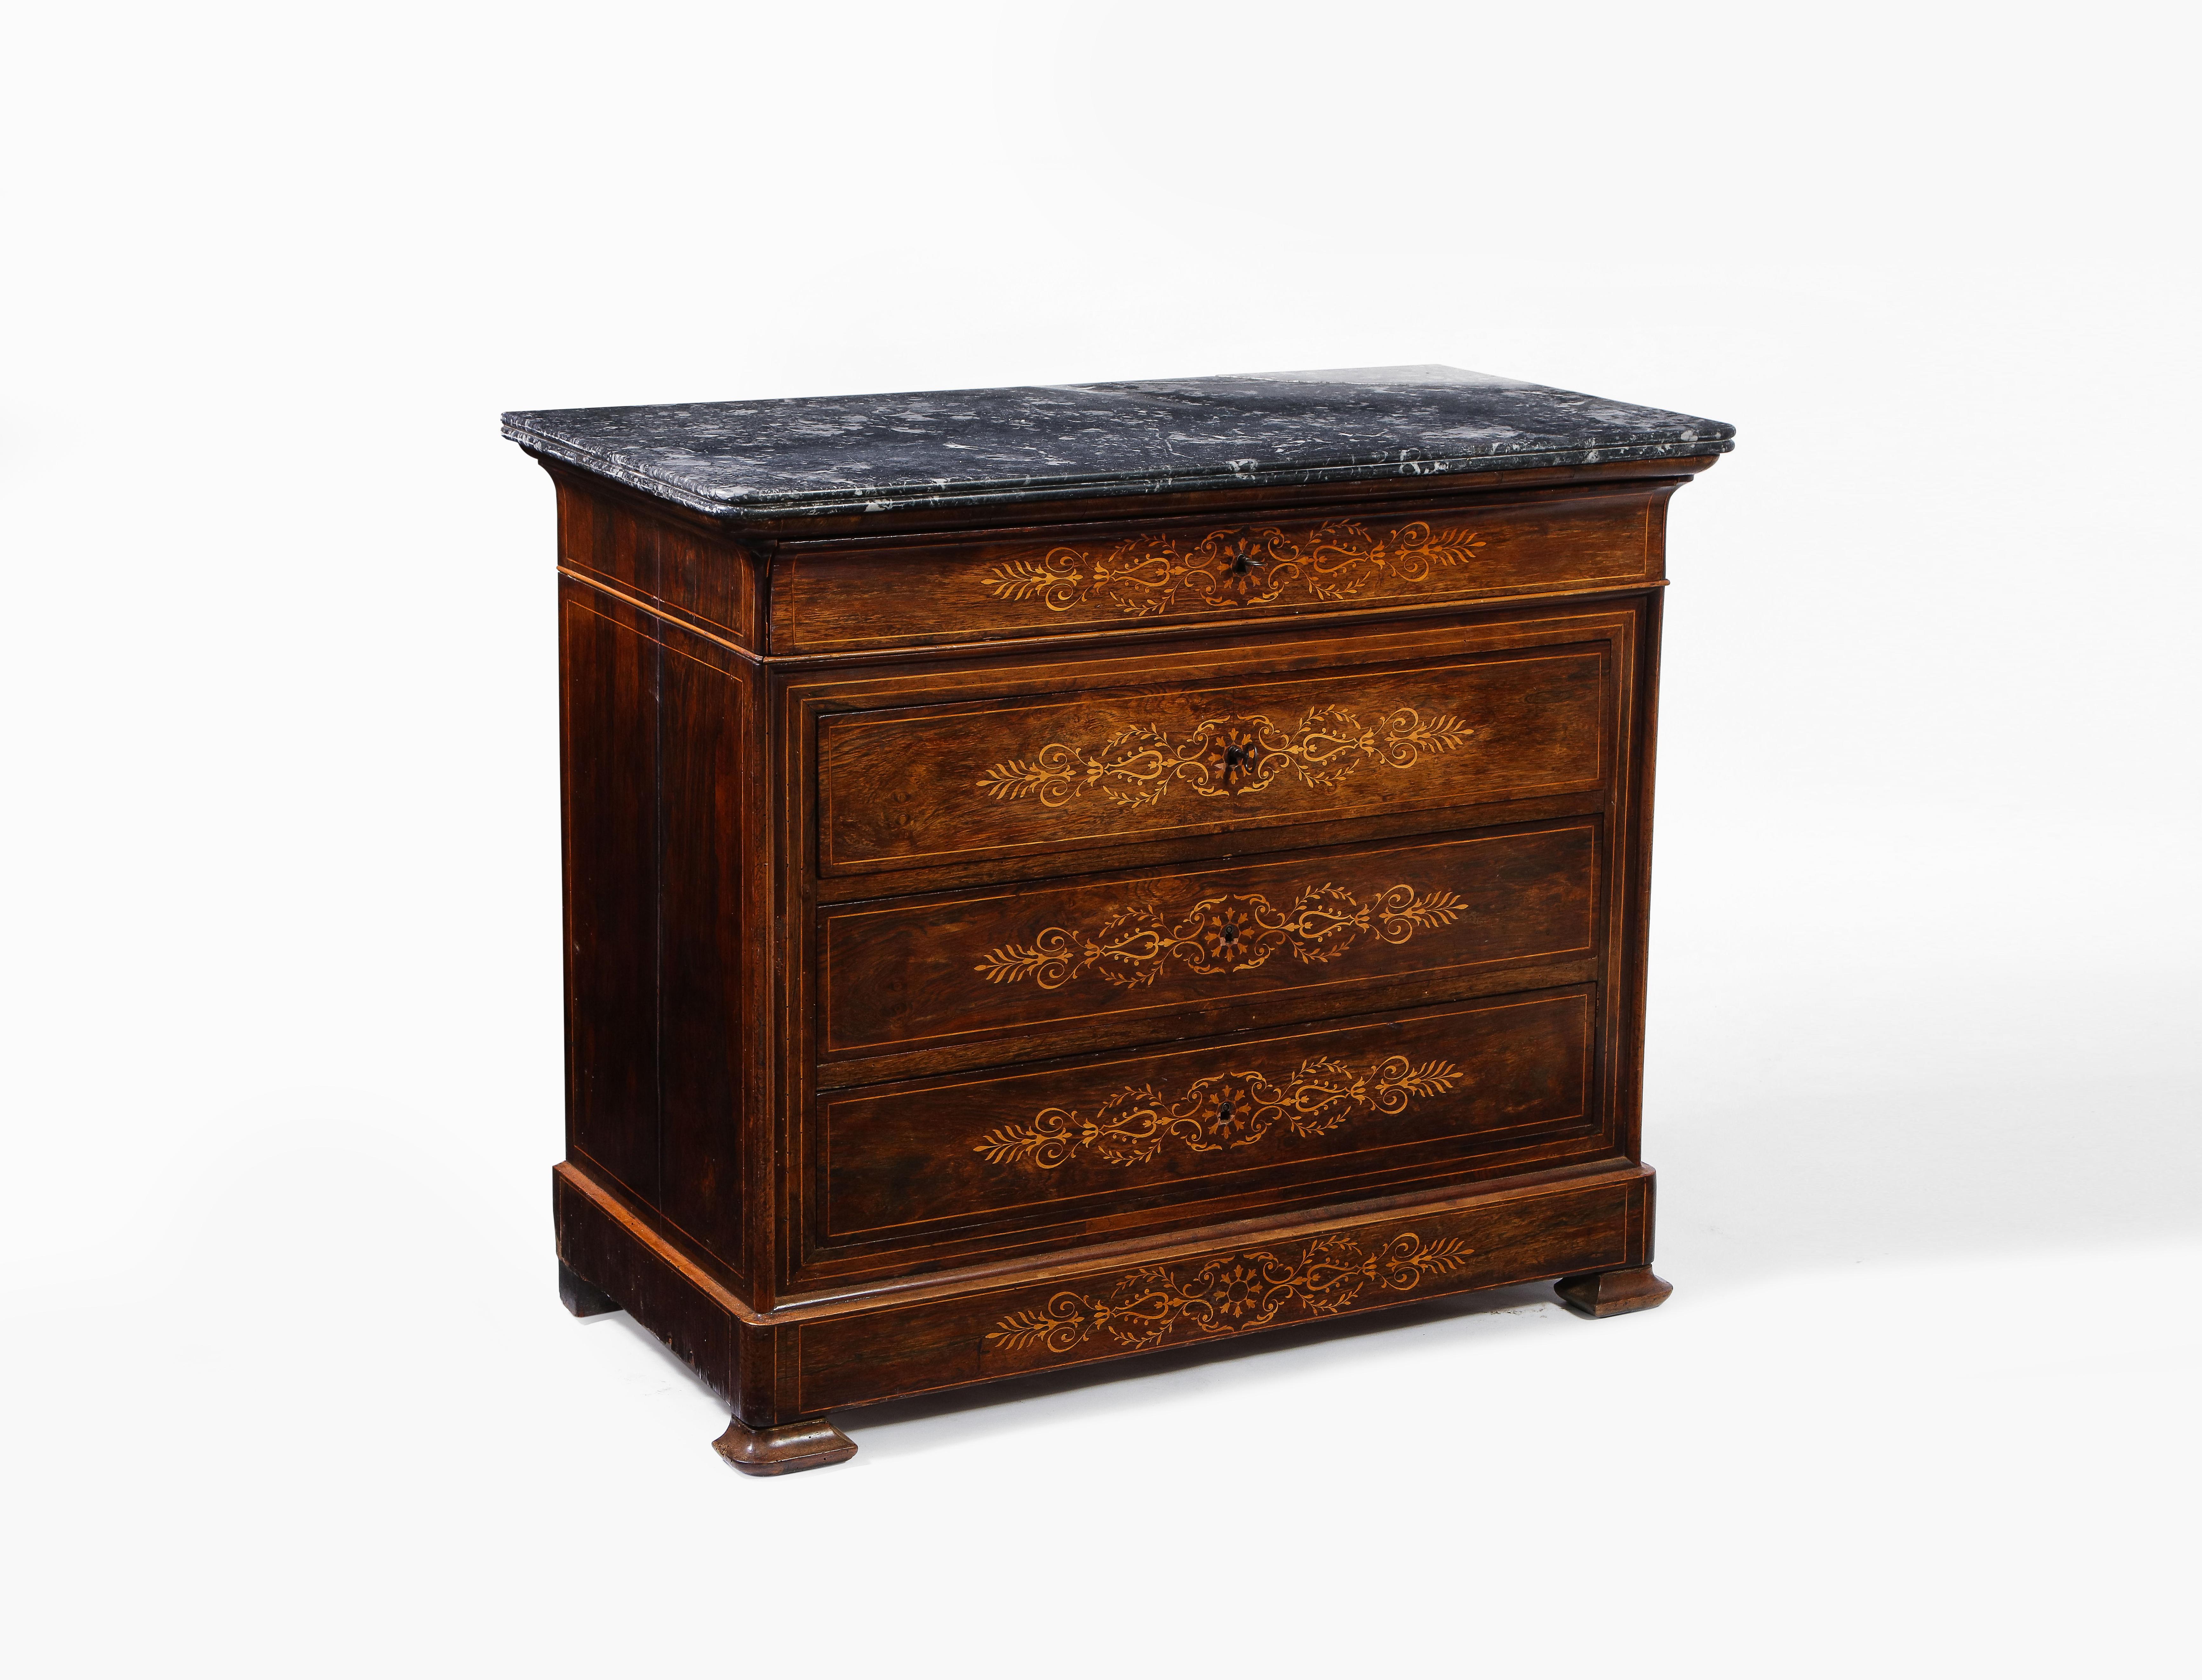 19th century walnut dresser with lighter toned marquetry inlay on the facade of each drawer. Stone top in anthracite colored marble with intricate soft grey veining.